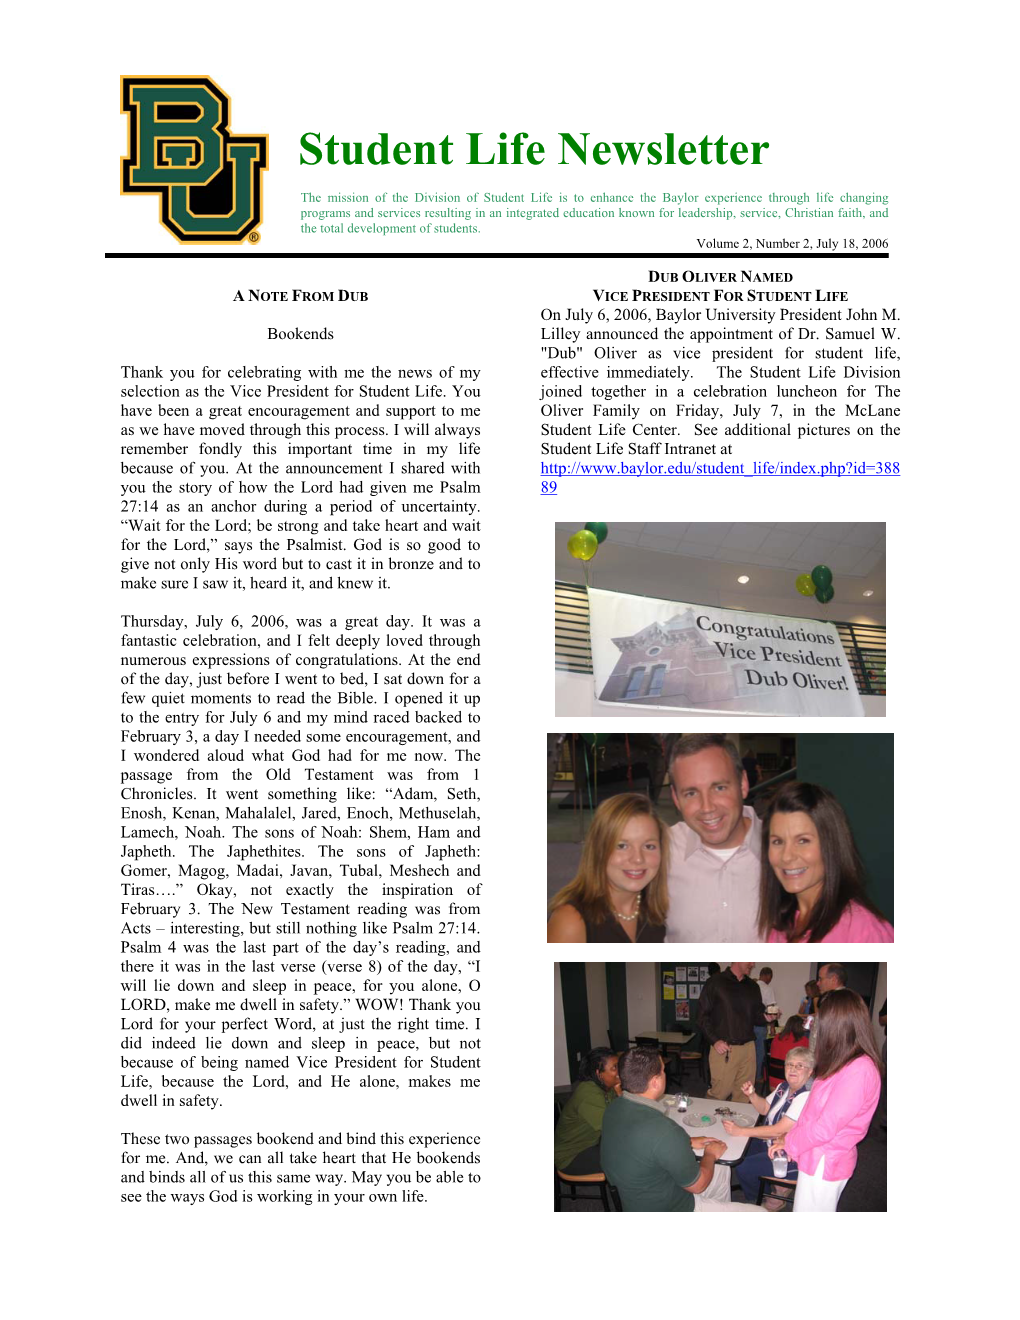 Student Life Division Monthly Newsletter